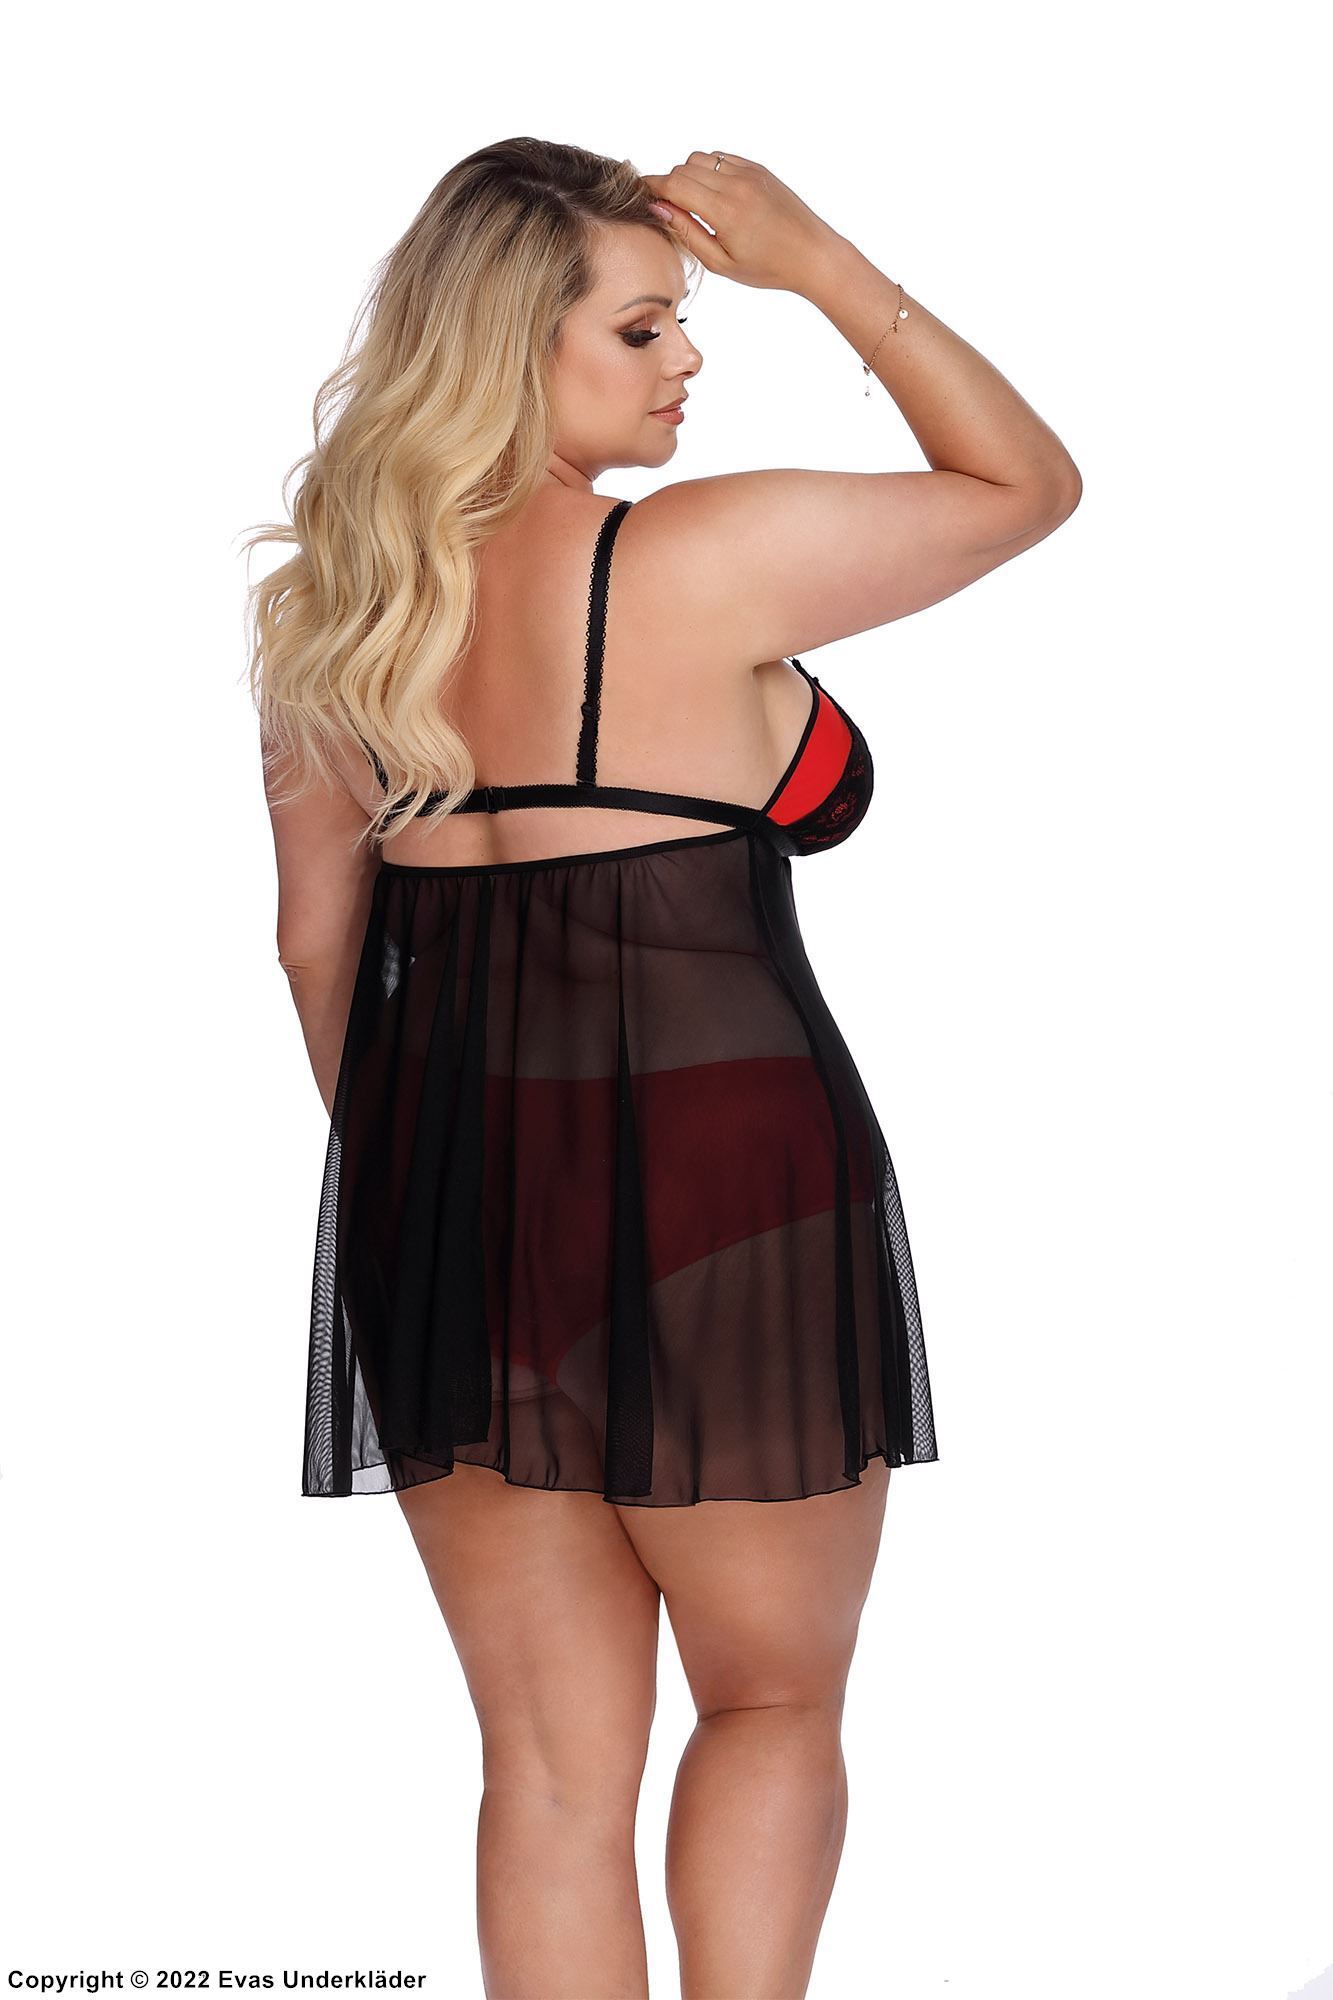 Elegant nightdress, sheer mesh, straps over bust, lace cups, rings, plus size